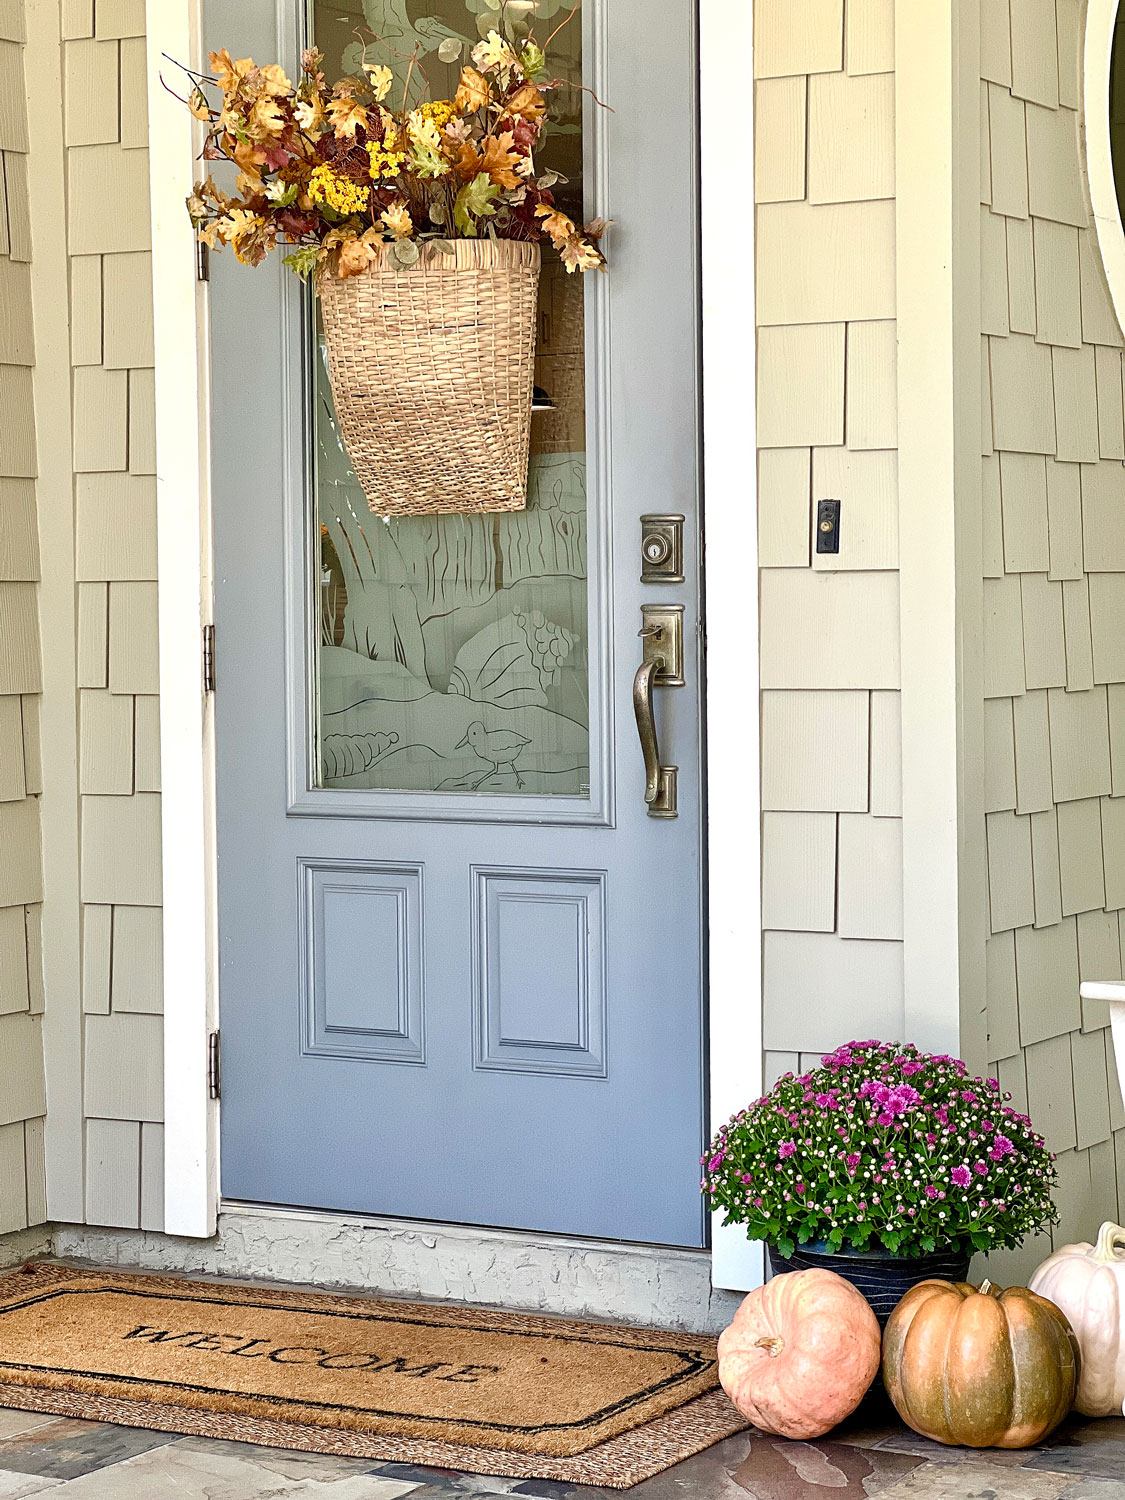 Door basket with Fall leaves